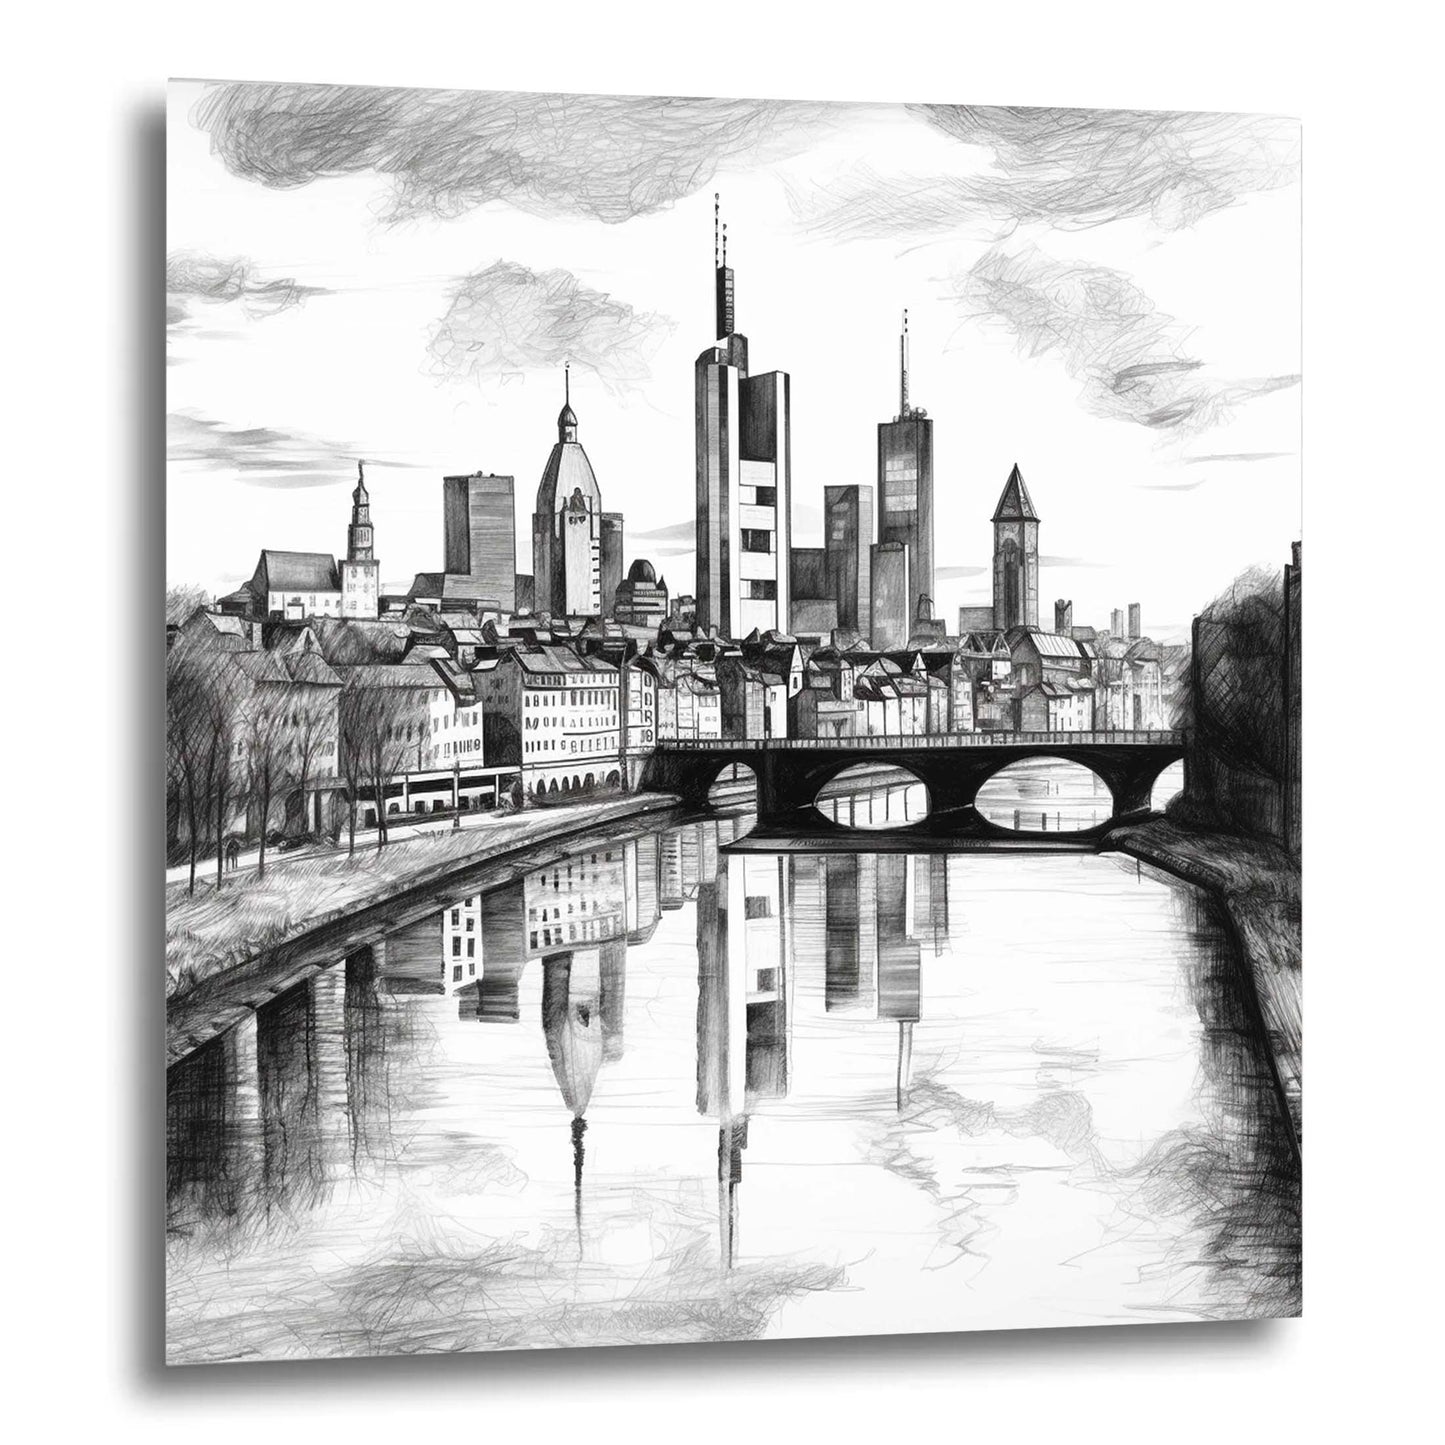 Frankfurt Skyline - mural in the style of a drawing